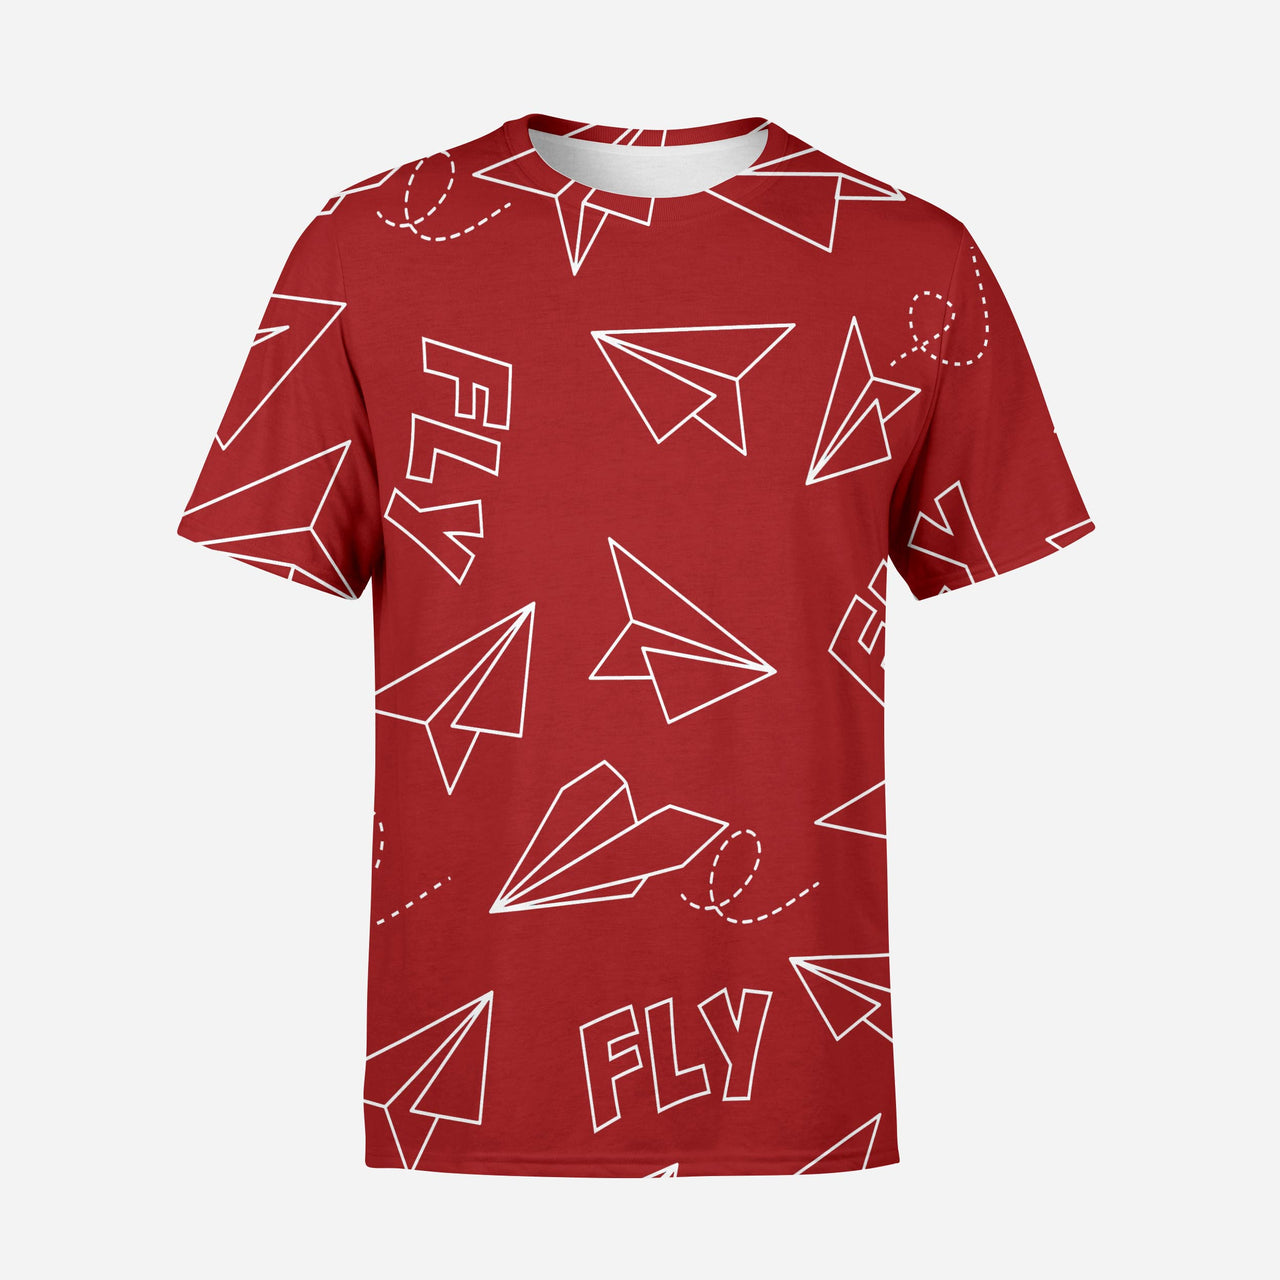 Paper Airplane & Fly (Red) Designed 3D T-Shirts